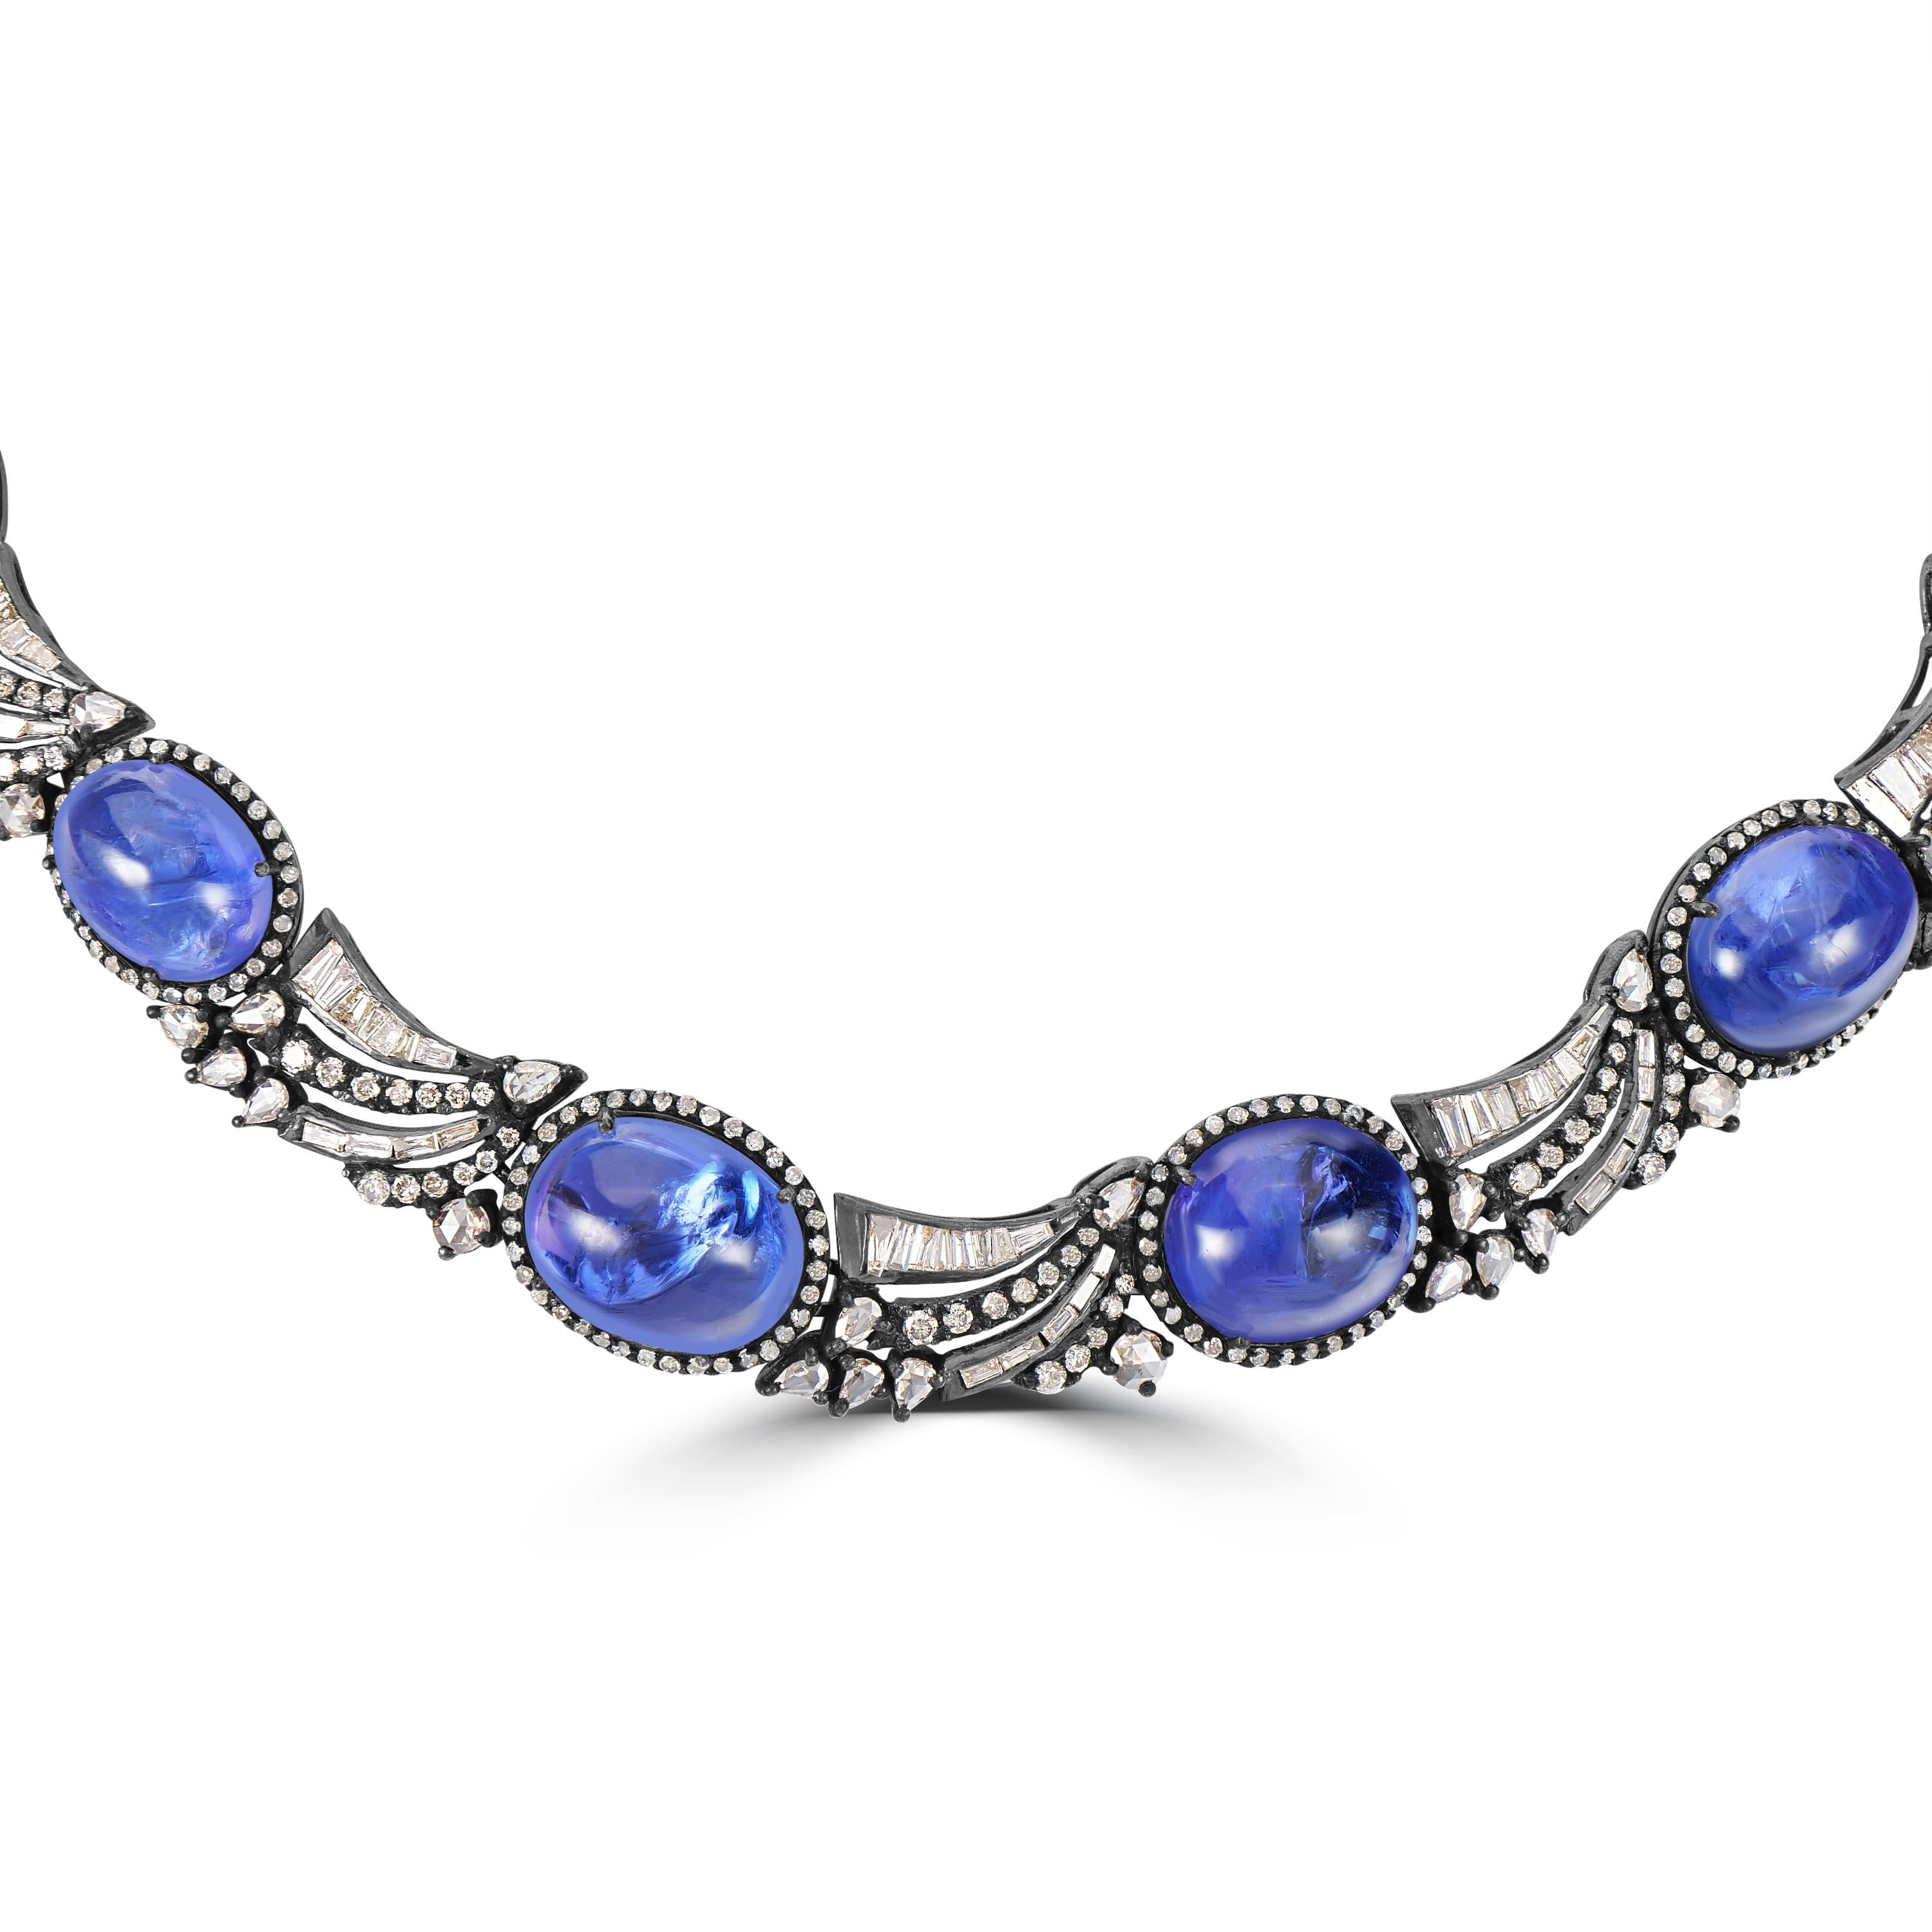 Introducing our opulent Victorian 98.75 Cttw. Tanzanite and Diamond Choker Necklace, a breathtaking statement piece that exudes timeless elegance and sophistication.

This magnificent choker necklace features nine stunning oval tanzanite, each